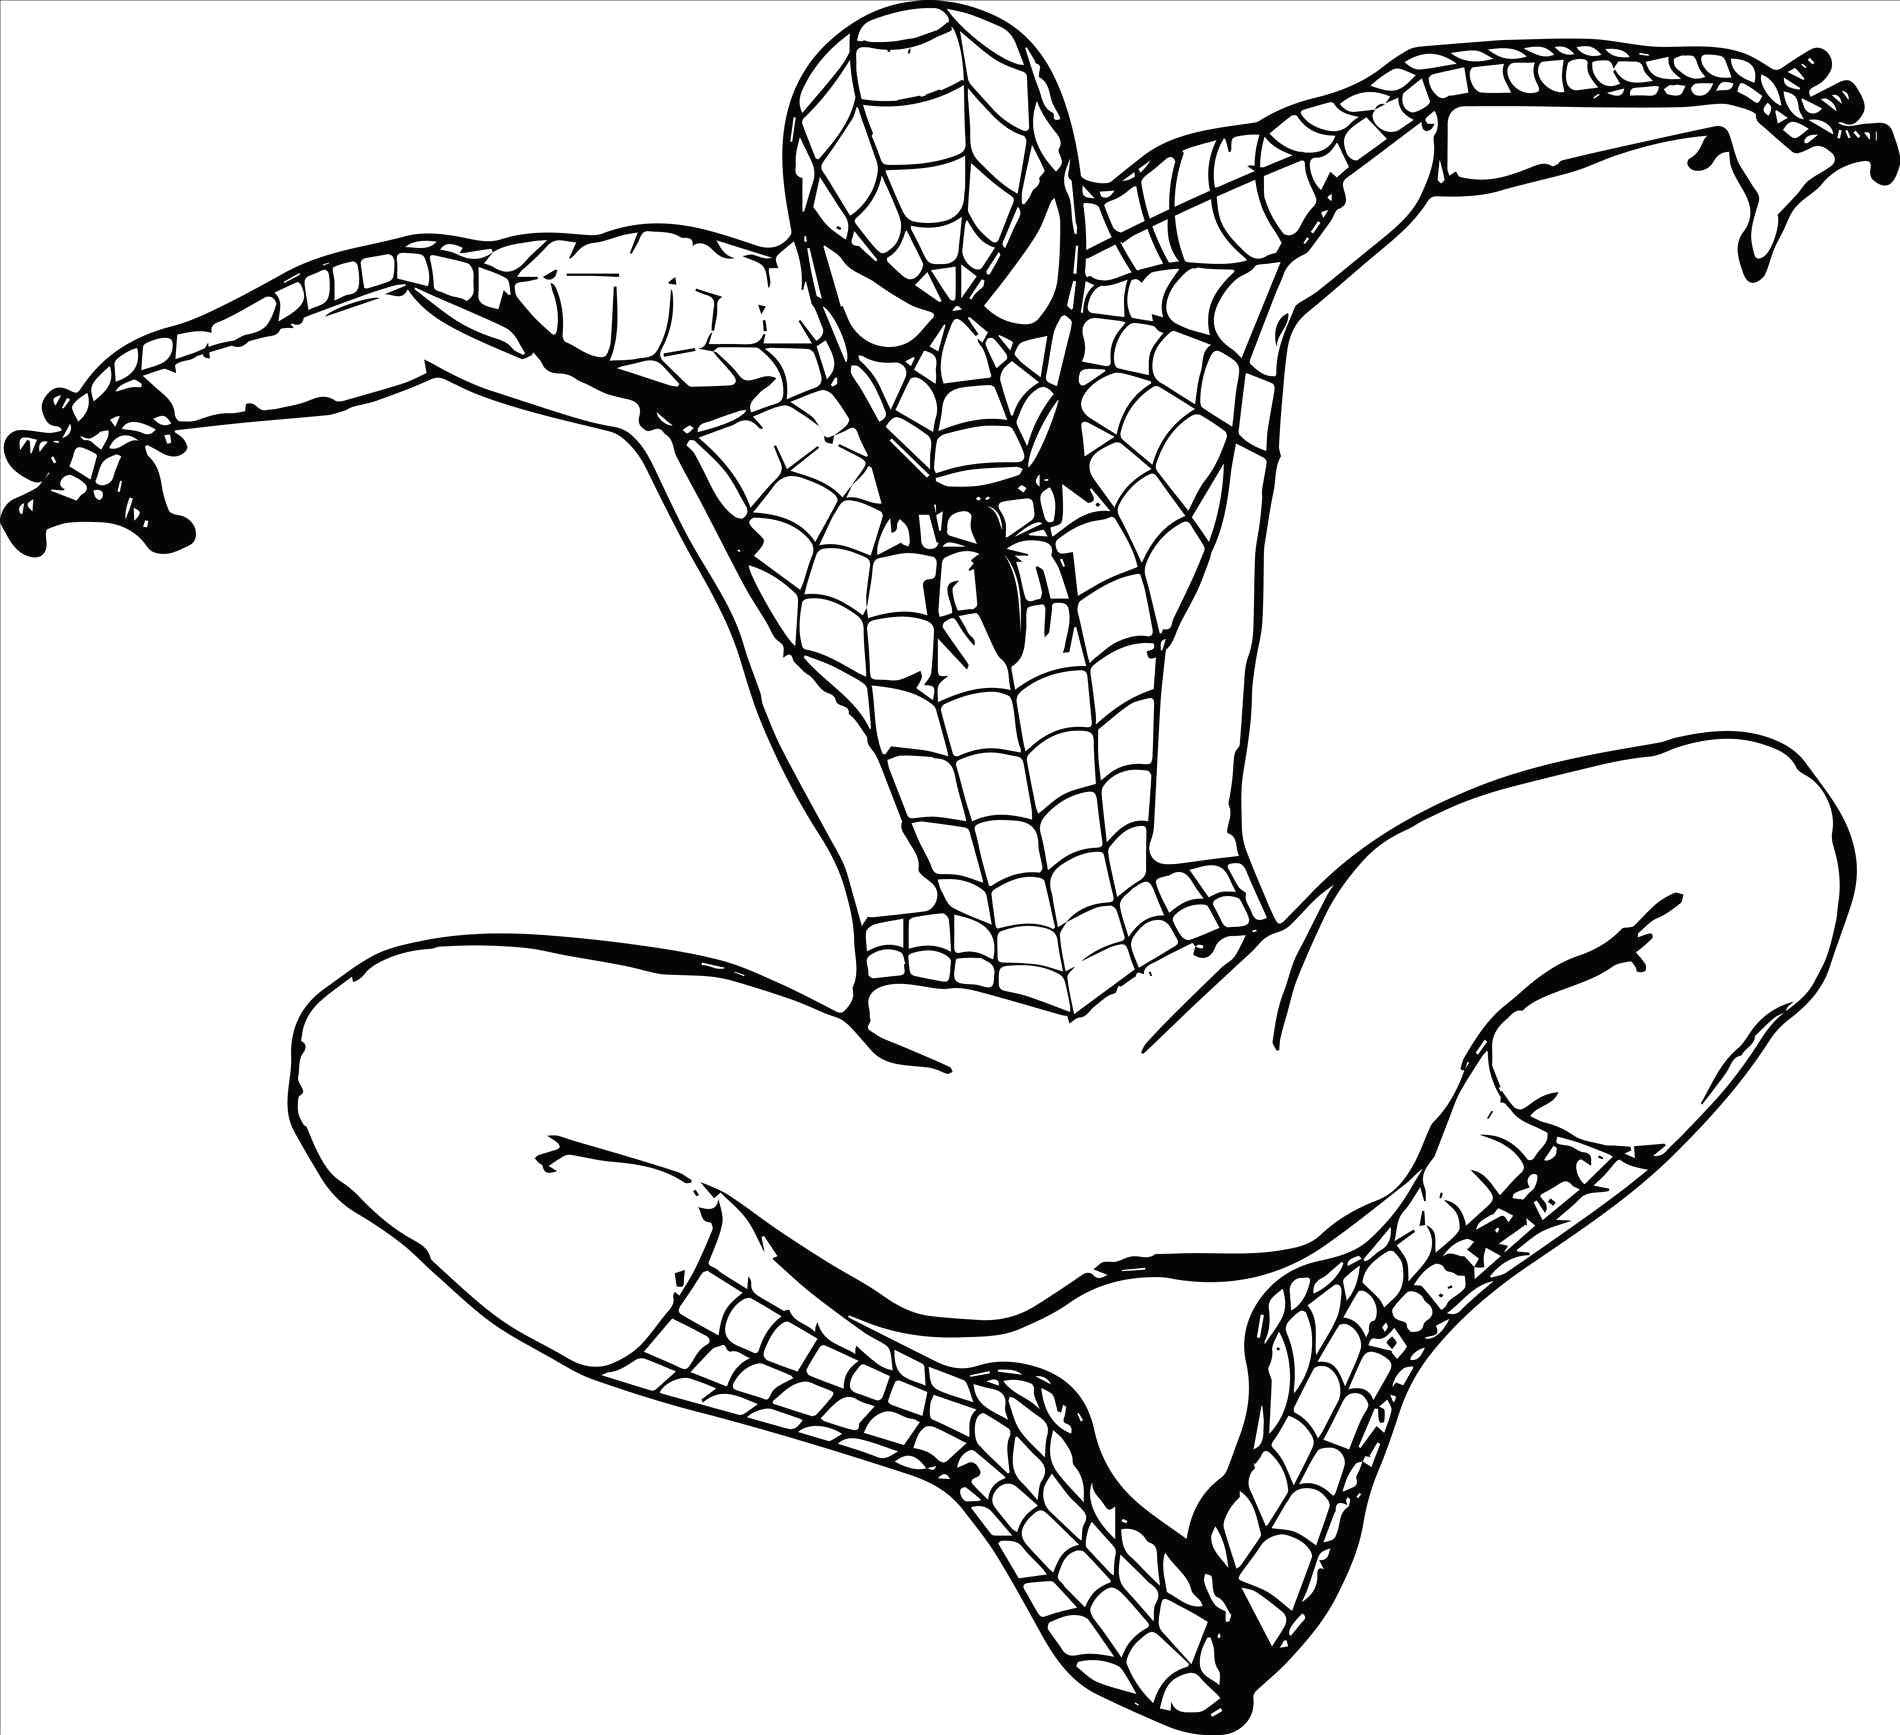 Drawing A Easy Person Superheroes Easy to Draw Spiderman Coloring Pages Luxury 0 0d